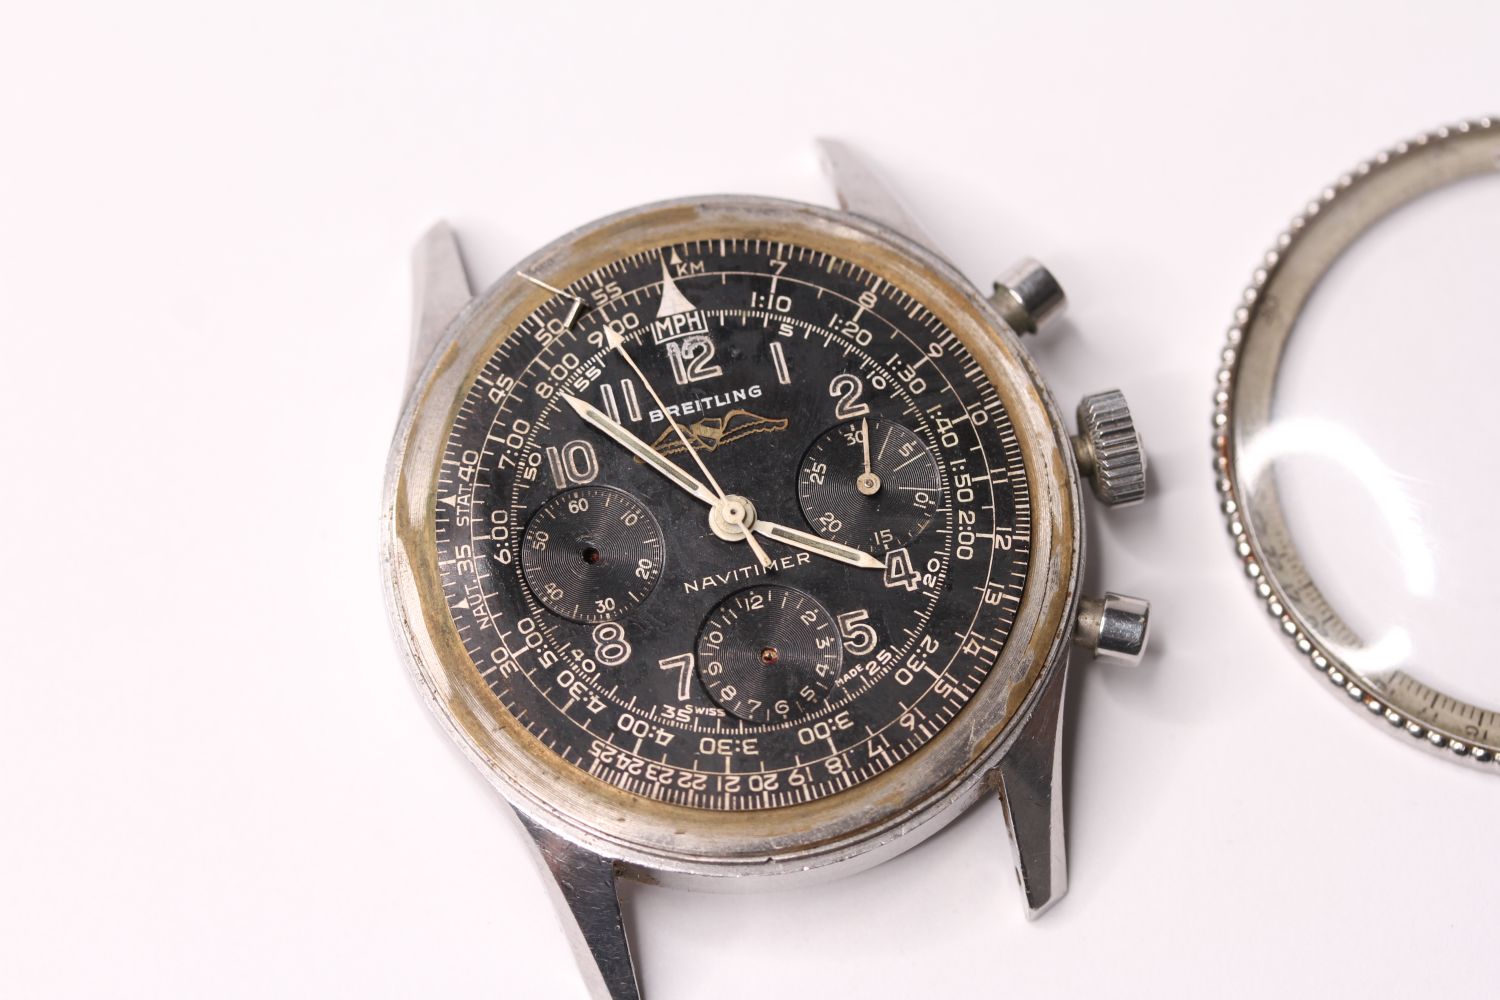 BREITLING NAVITIMER CHRONOGRAPH REFERENCE 806, circular black dial with triple register, white hands - Image 2 of 5